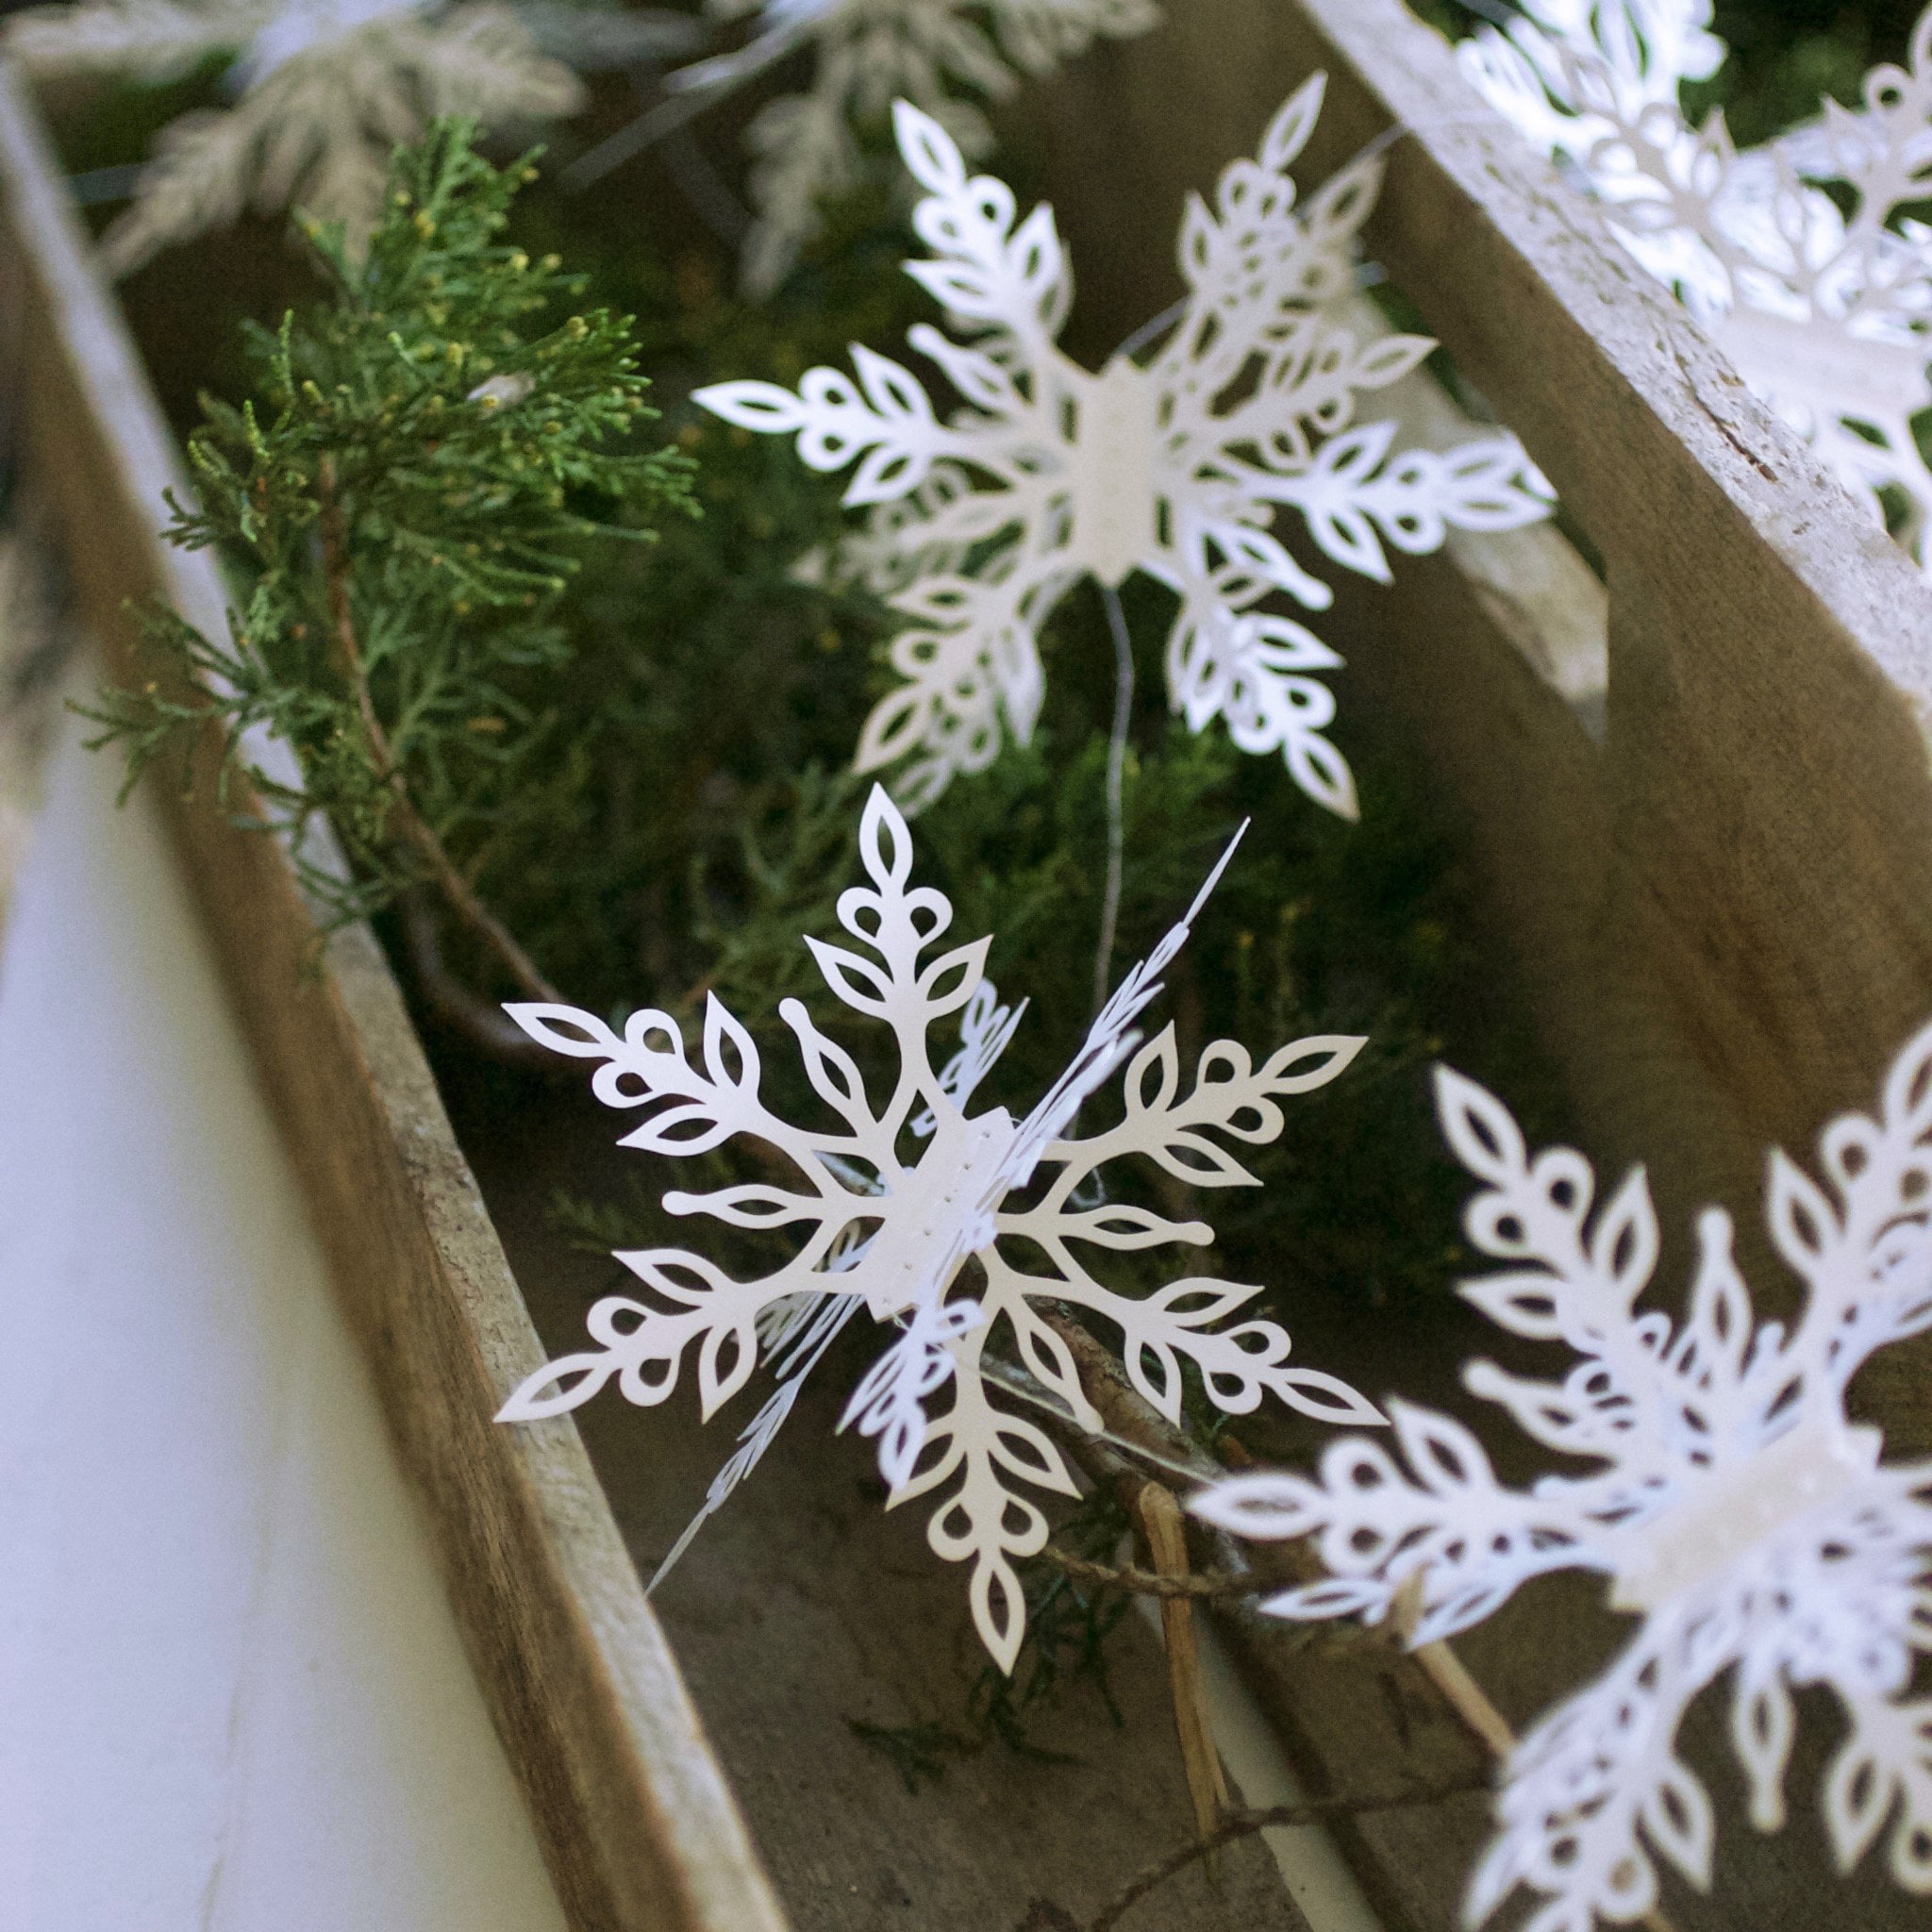 LINDOO winter snowflake hanging decorations - 3d large silver snowflakes  paper hanging garland for christmas winter wonderland